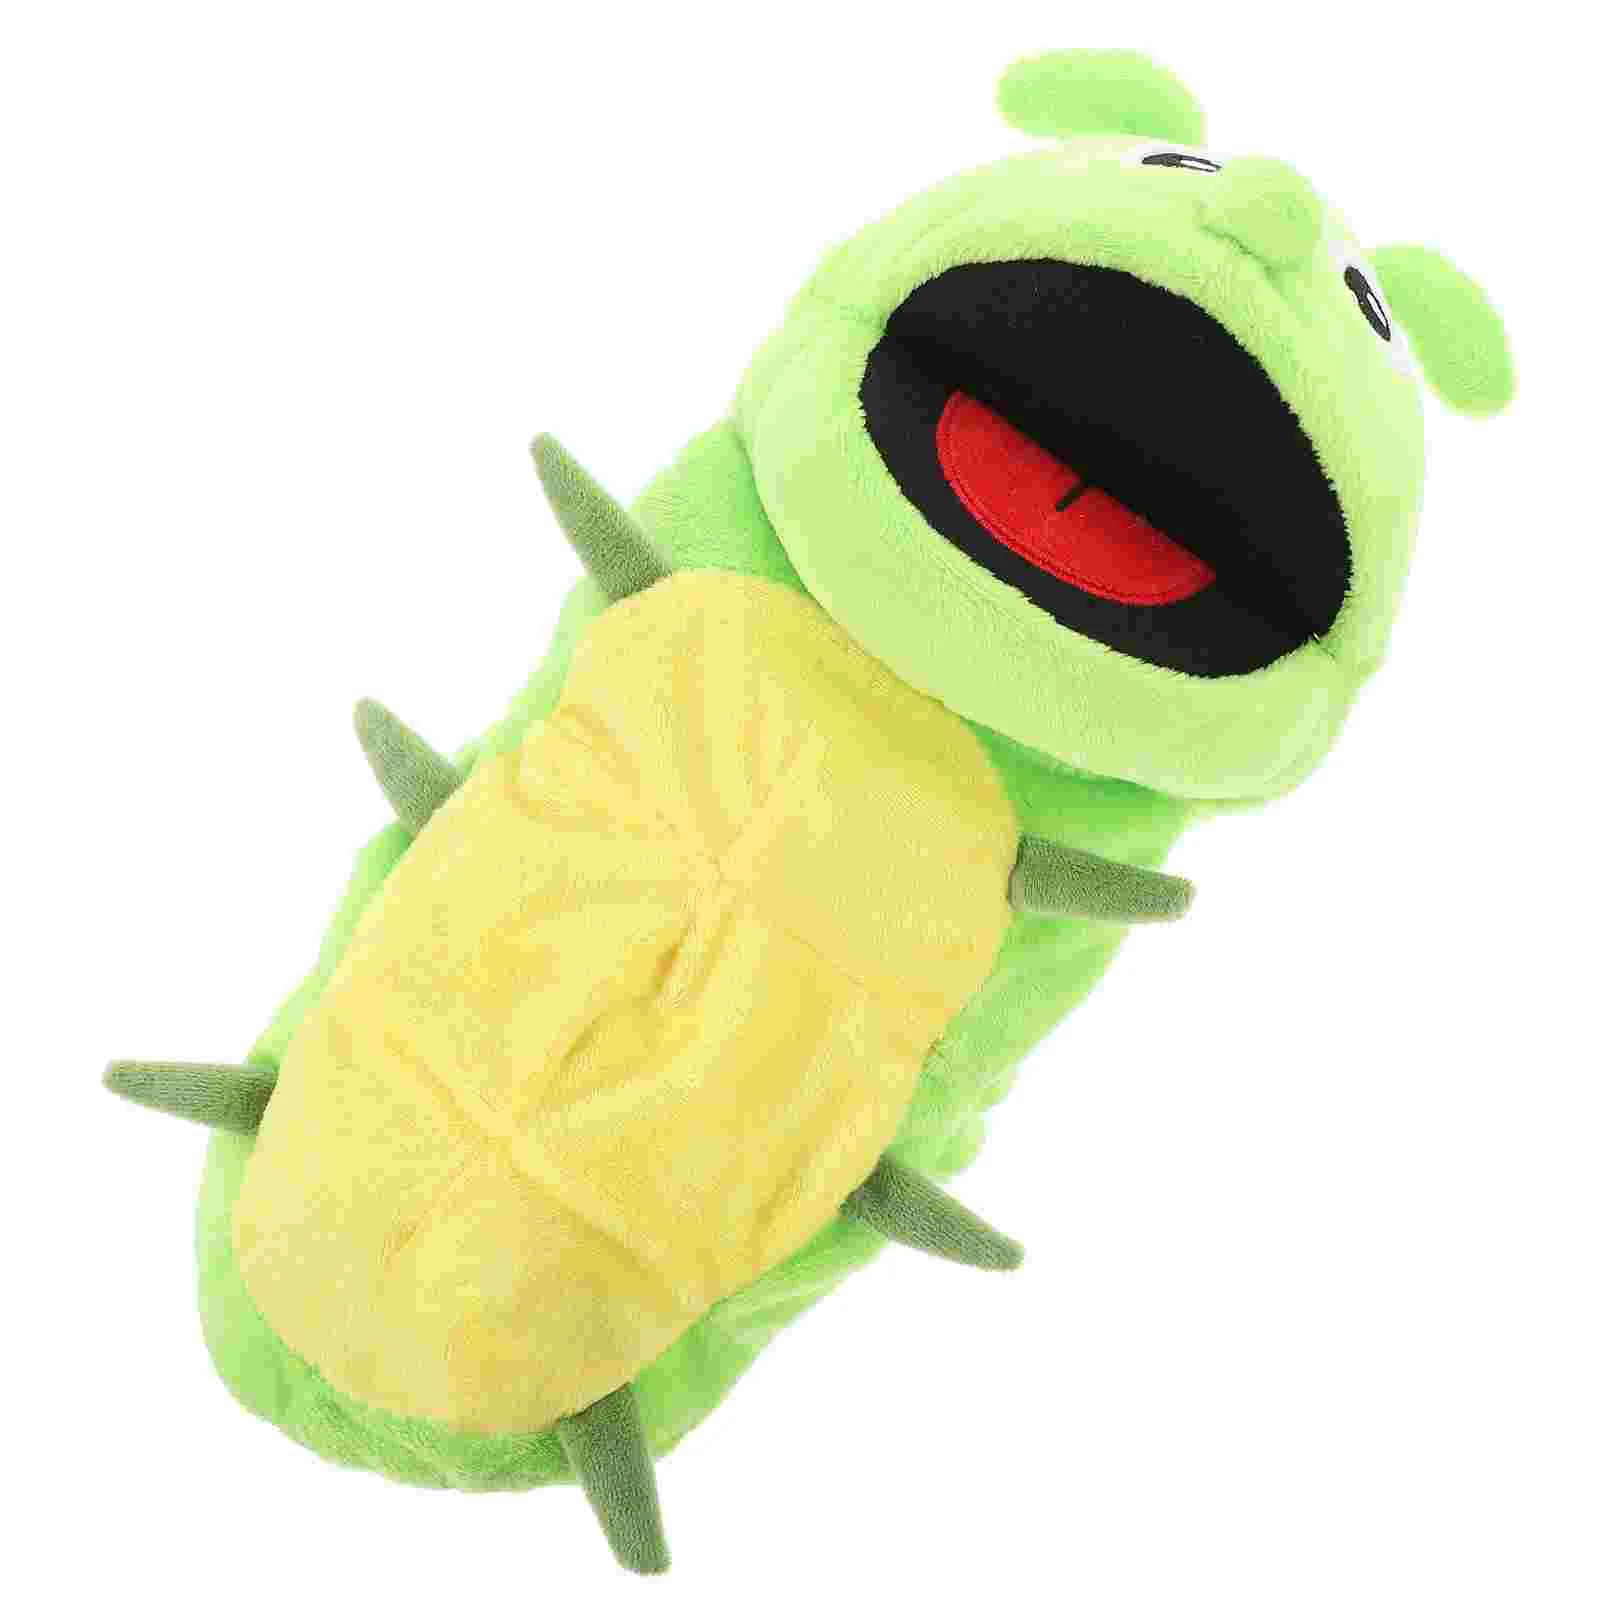 Imagination Game Role Play Caterpillar Hand Puppet Children’s Toys Storytelling kids toys hand puppet soft stuffed open mouths animal hand puppets muppetdoll family interactive role playing storytelling toys